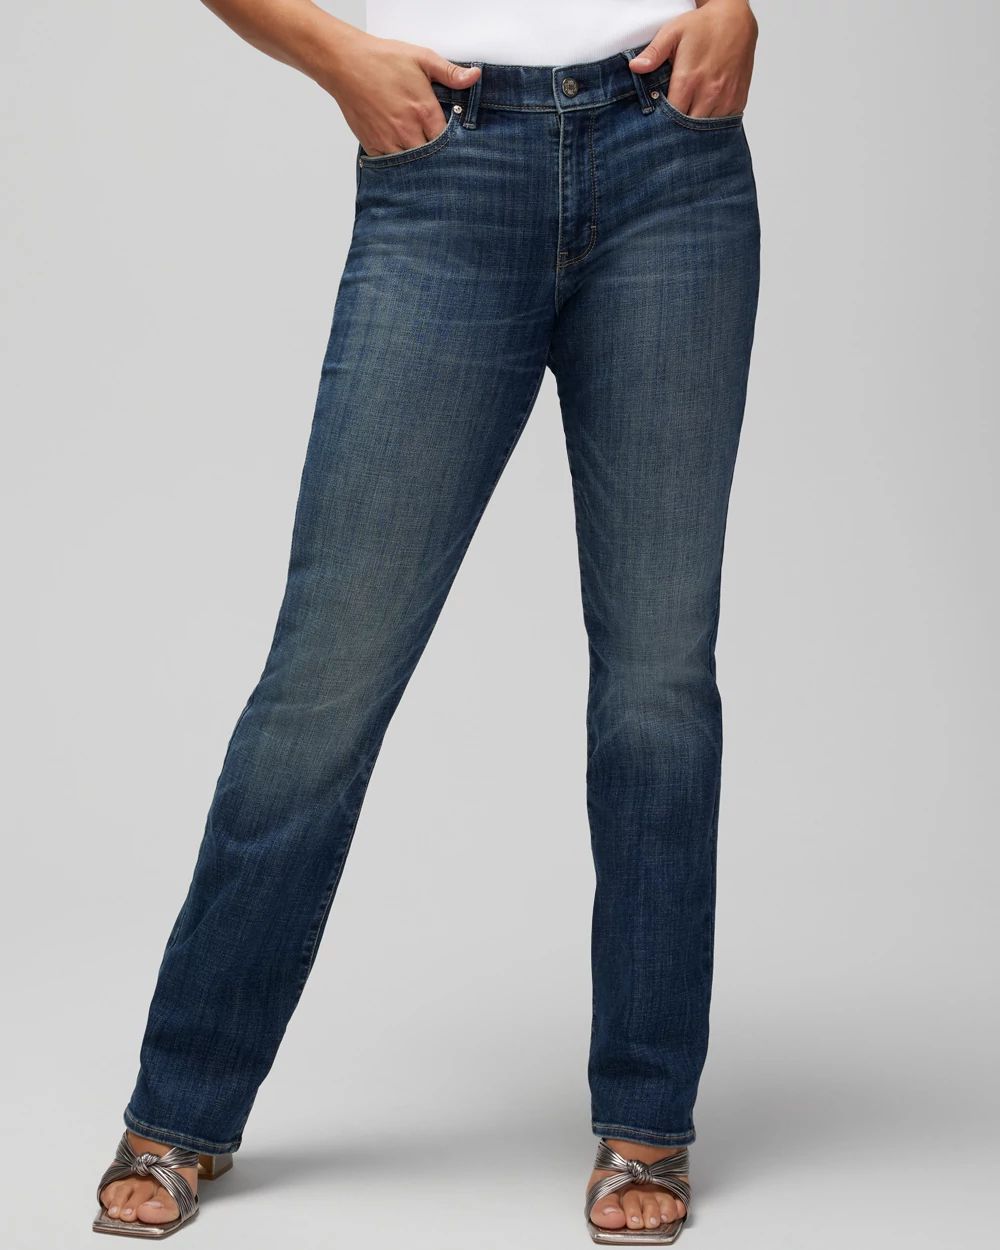 Curvy Mid-Rise Everyday Soft Denim™ Bootcut Jeans click to view larger image.